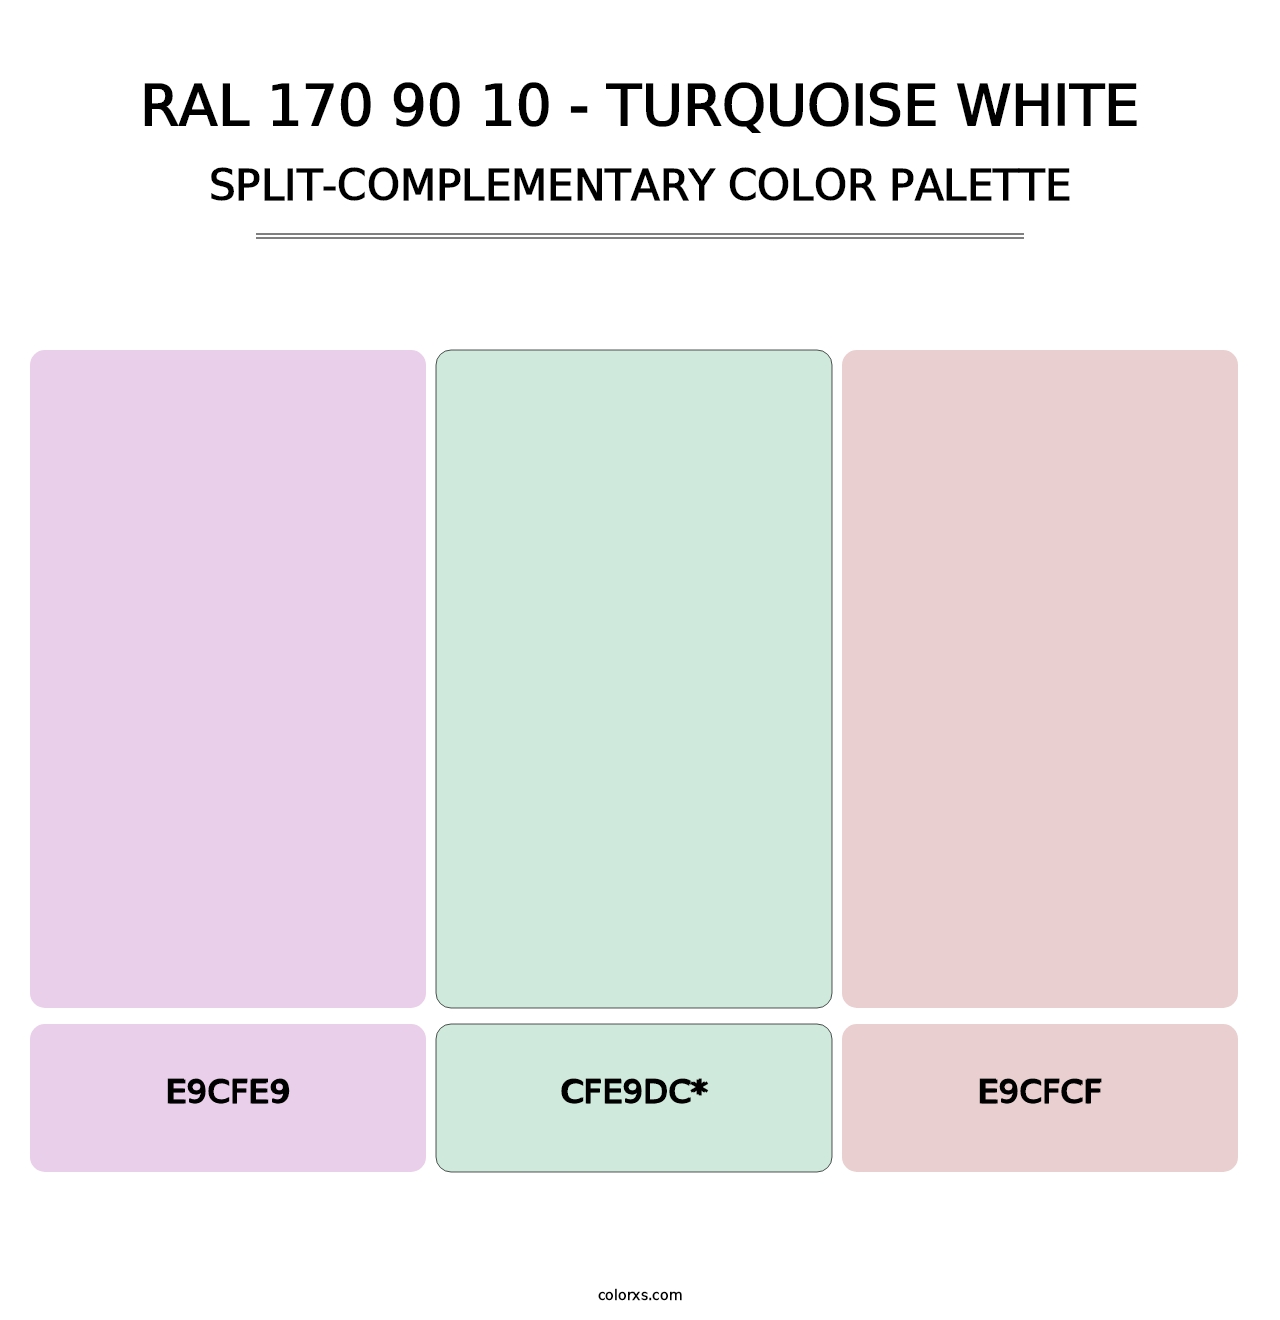 RAL 170 90 10 - Turquoise White - Split-Complementary Color Palette